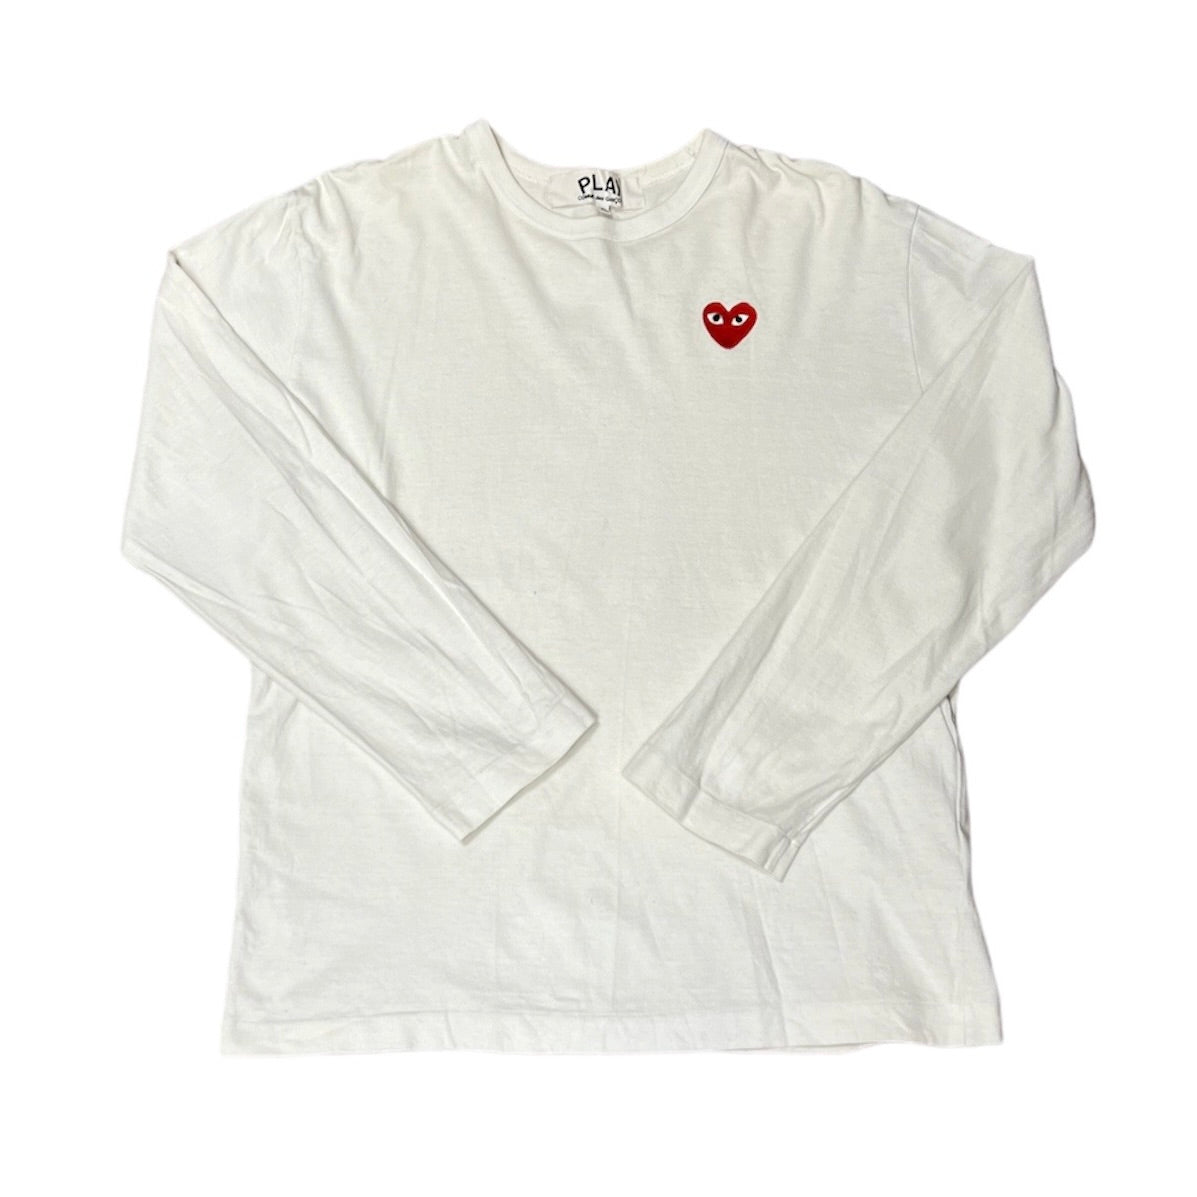 Comme des Garcons Play White Long Sleeve Tshirt